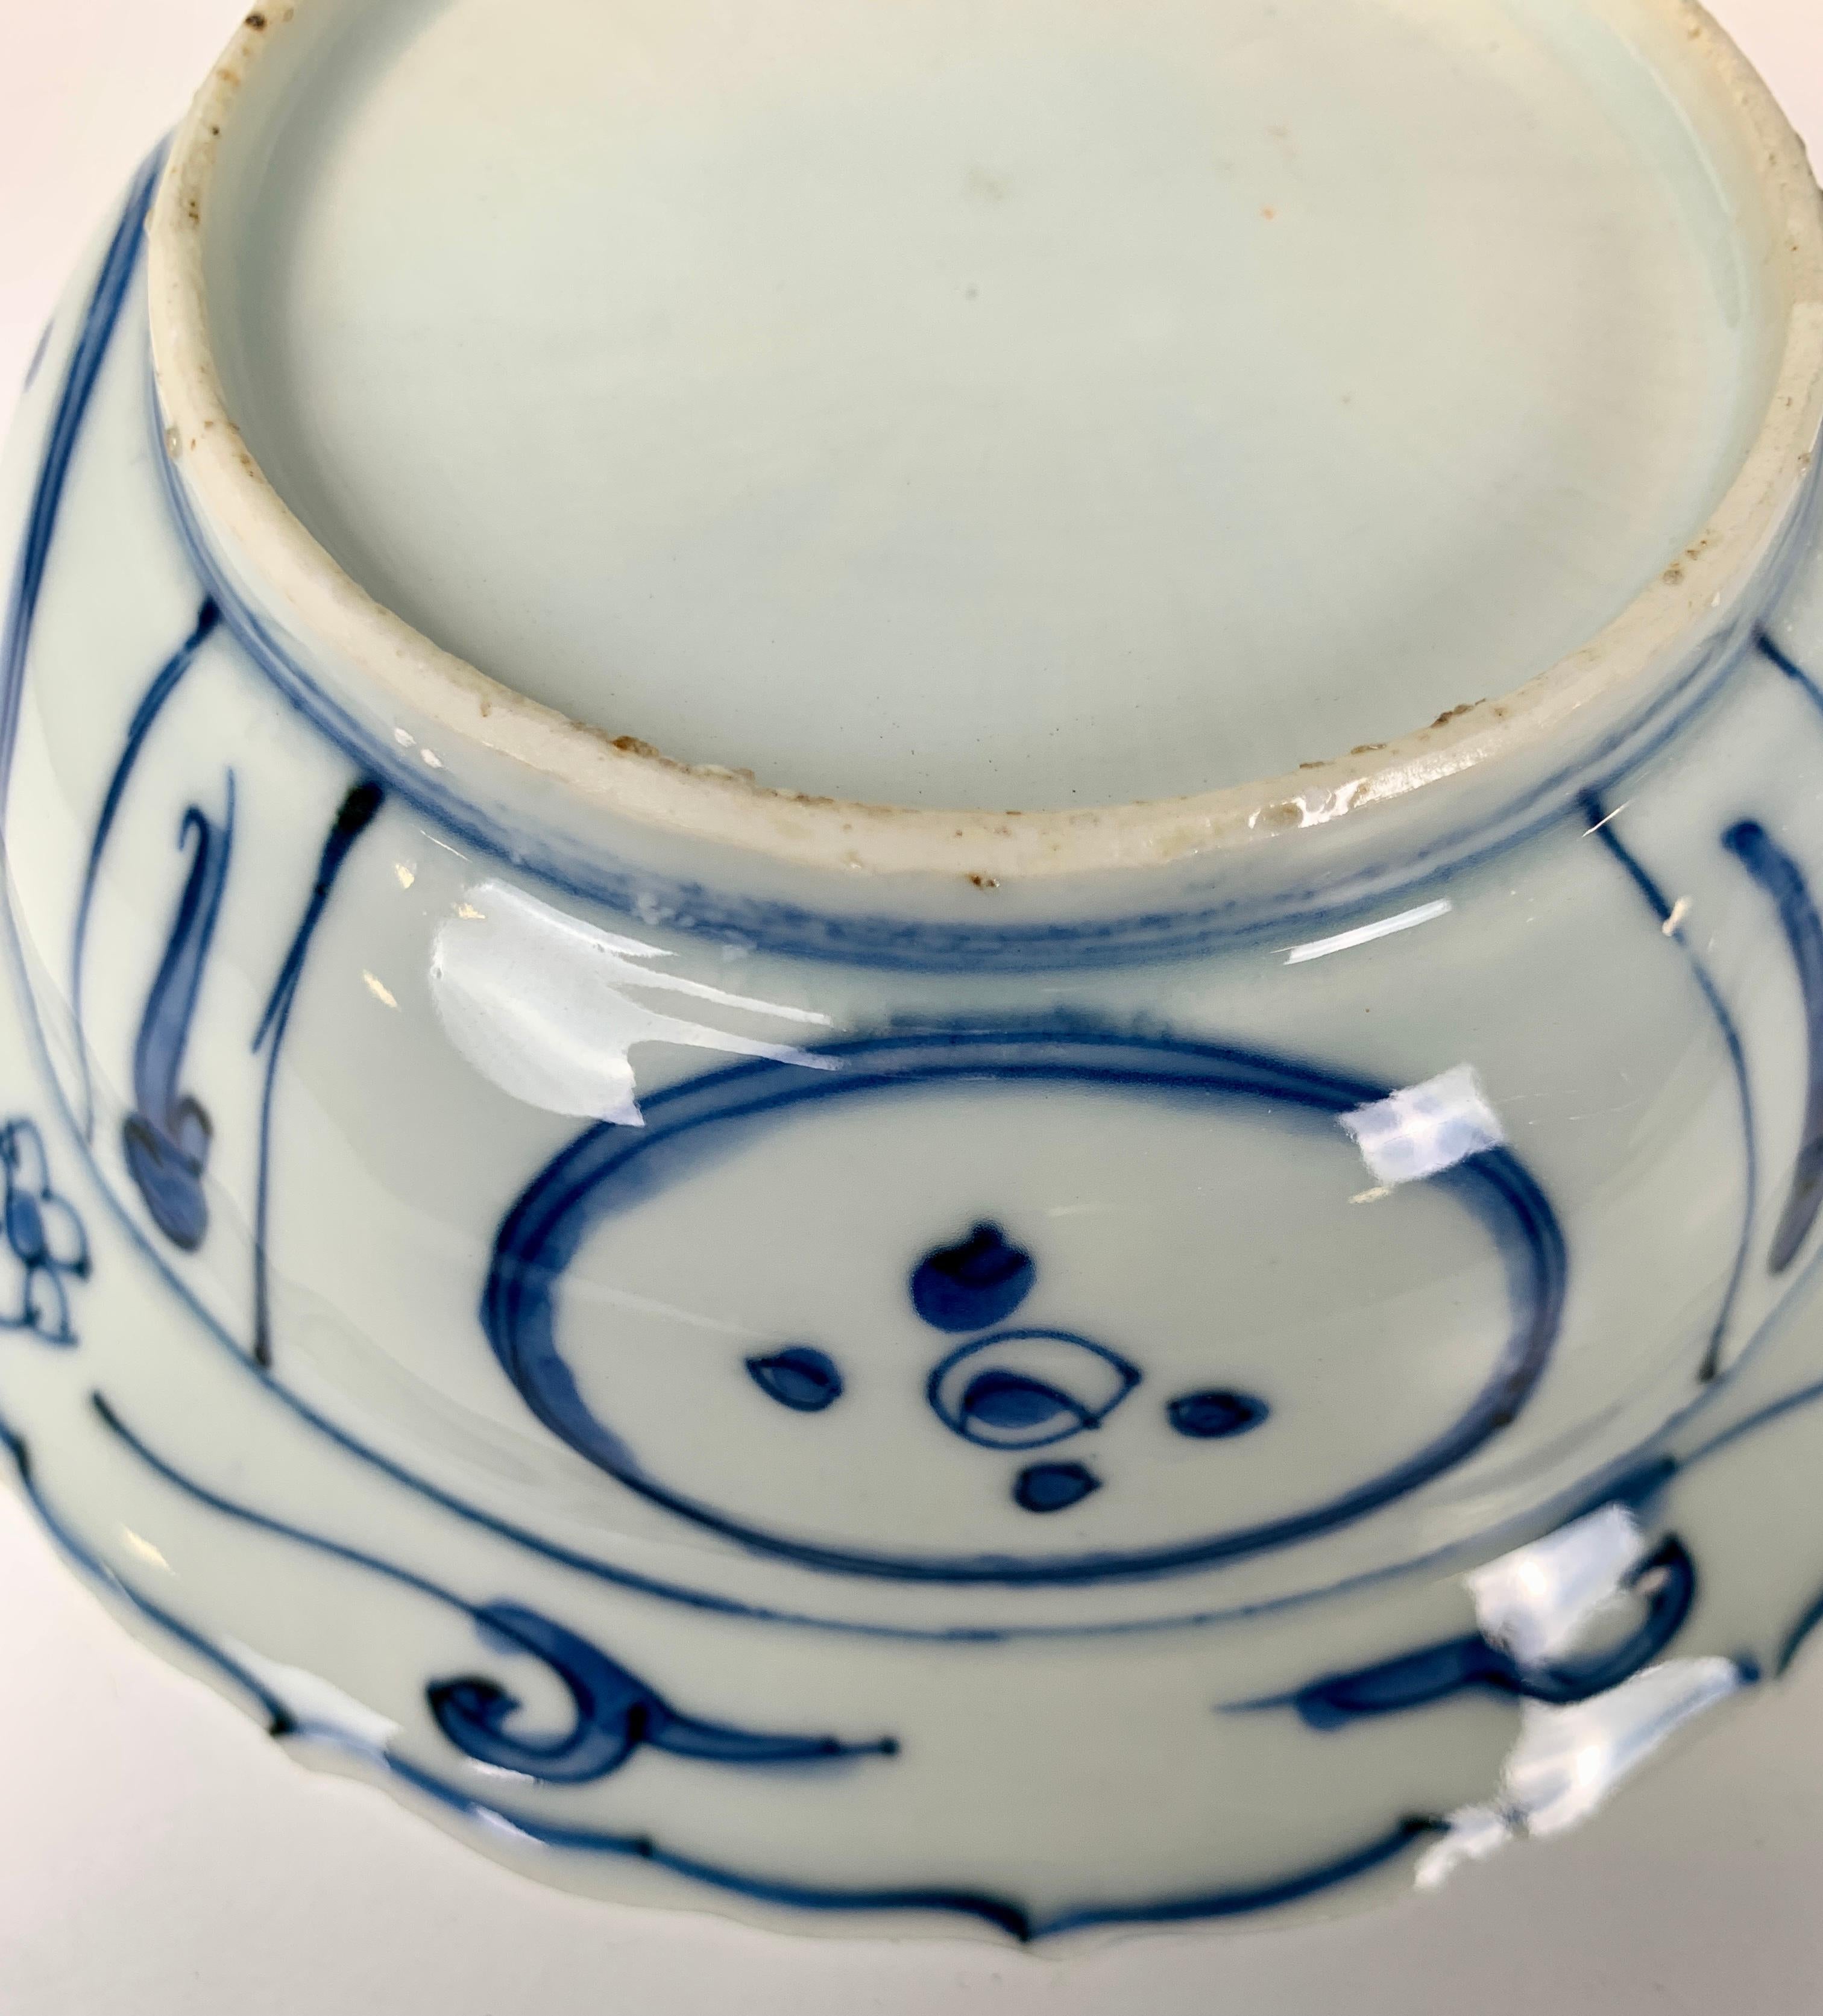 18th Century Blue and White Bowl Chinese Porcelain Kraak Made for Export c-1700 Kangxi Period